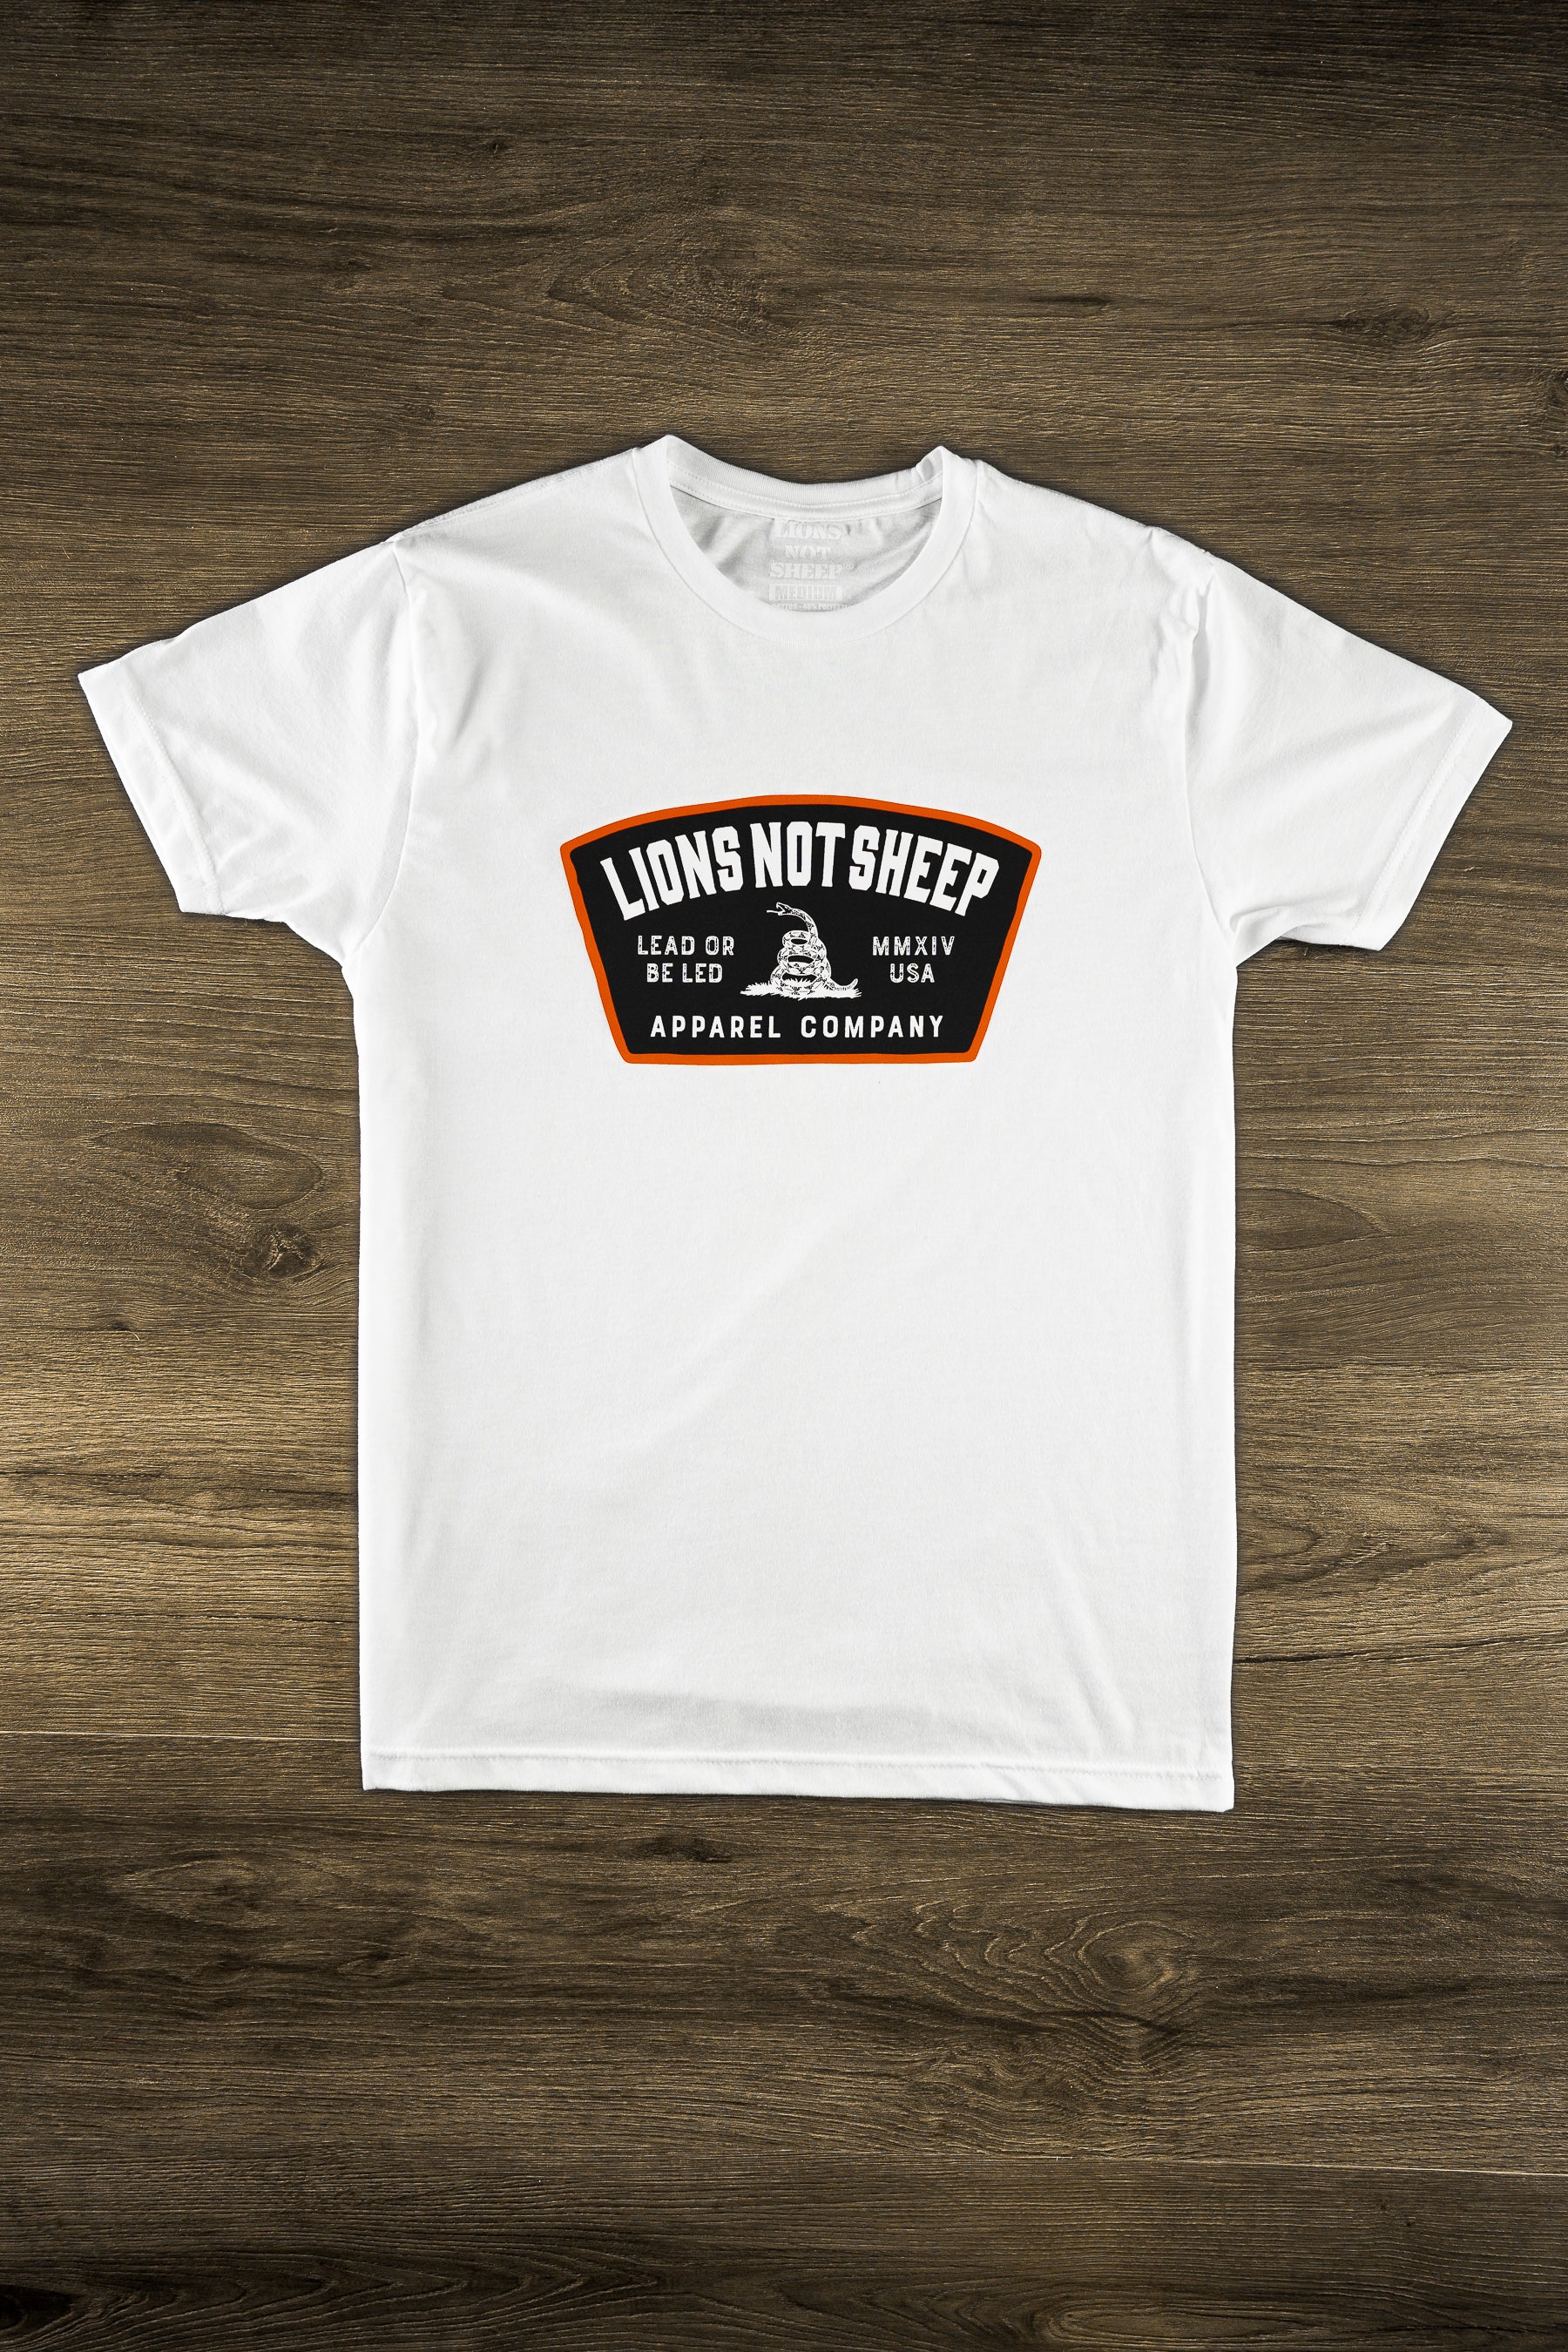 LEAD FROM THE FRONT Tee (White or Black) - Lions Not Sheep ®